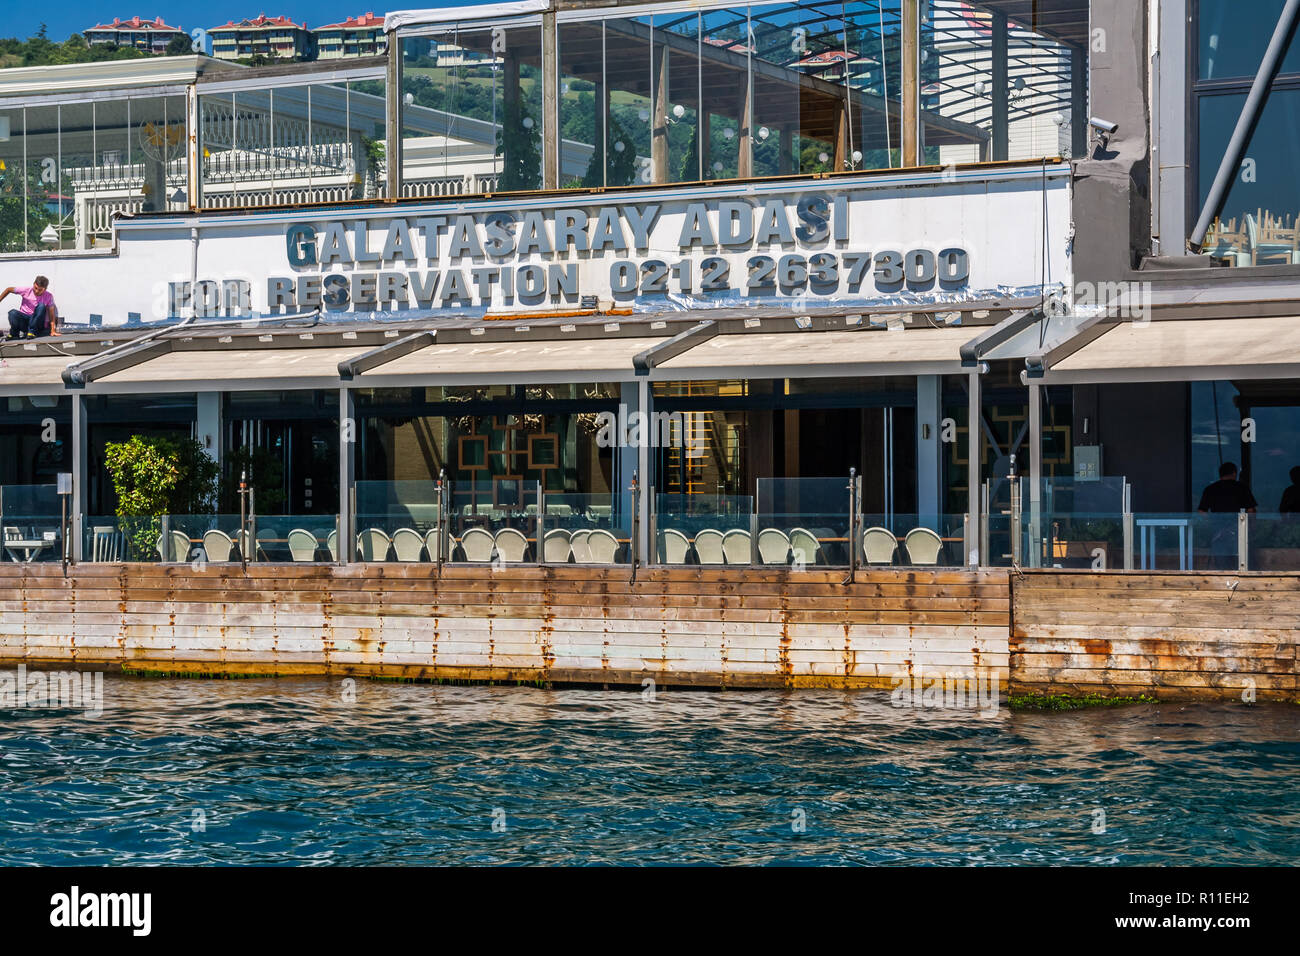 Istanbul, Turkey, June 12, 2012: Galatasaray Island, also known as Suada club, before the demolition in 2017. Stock Photo